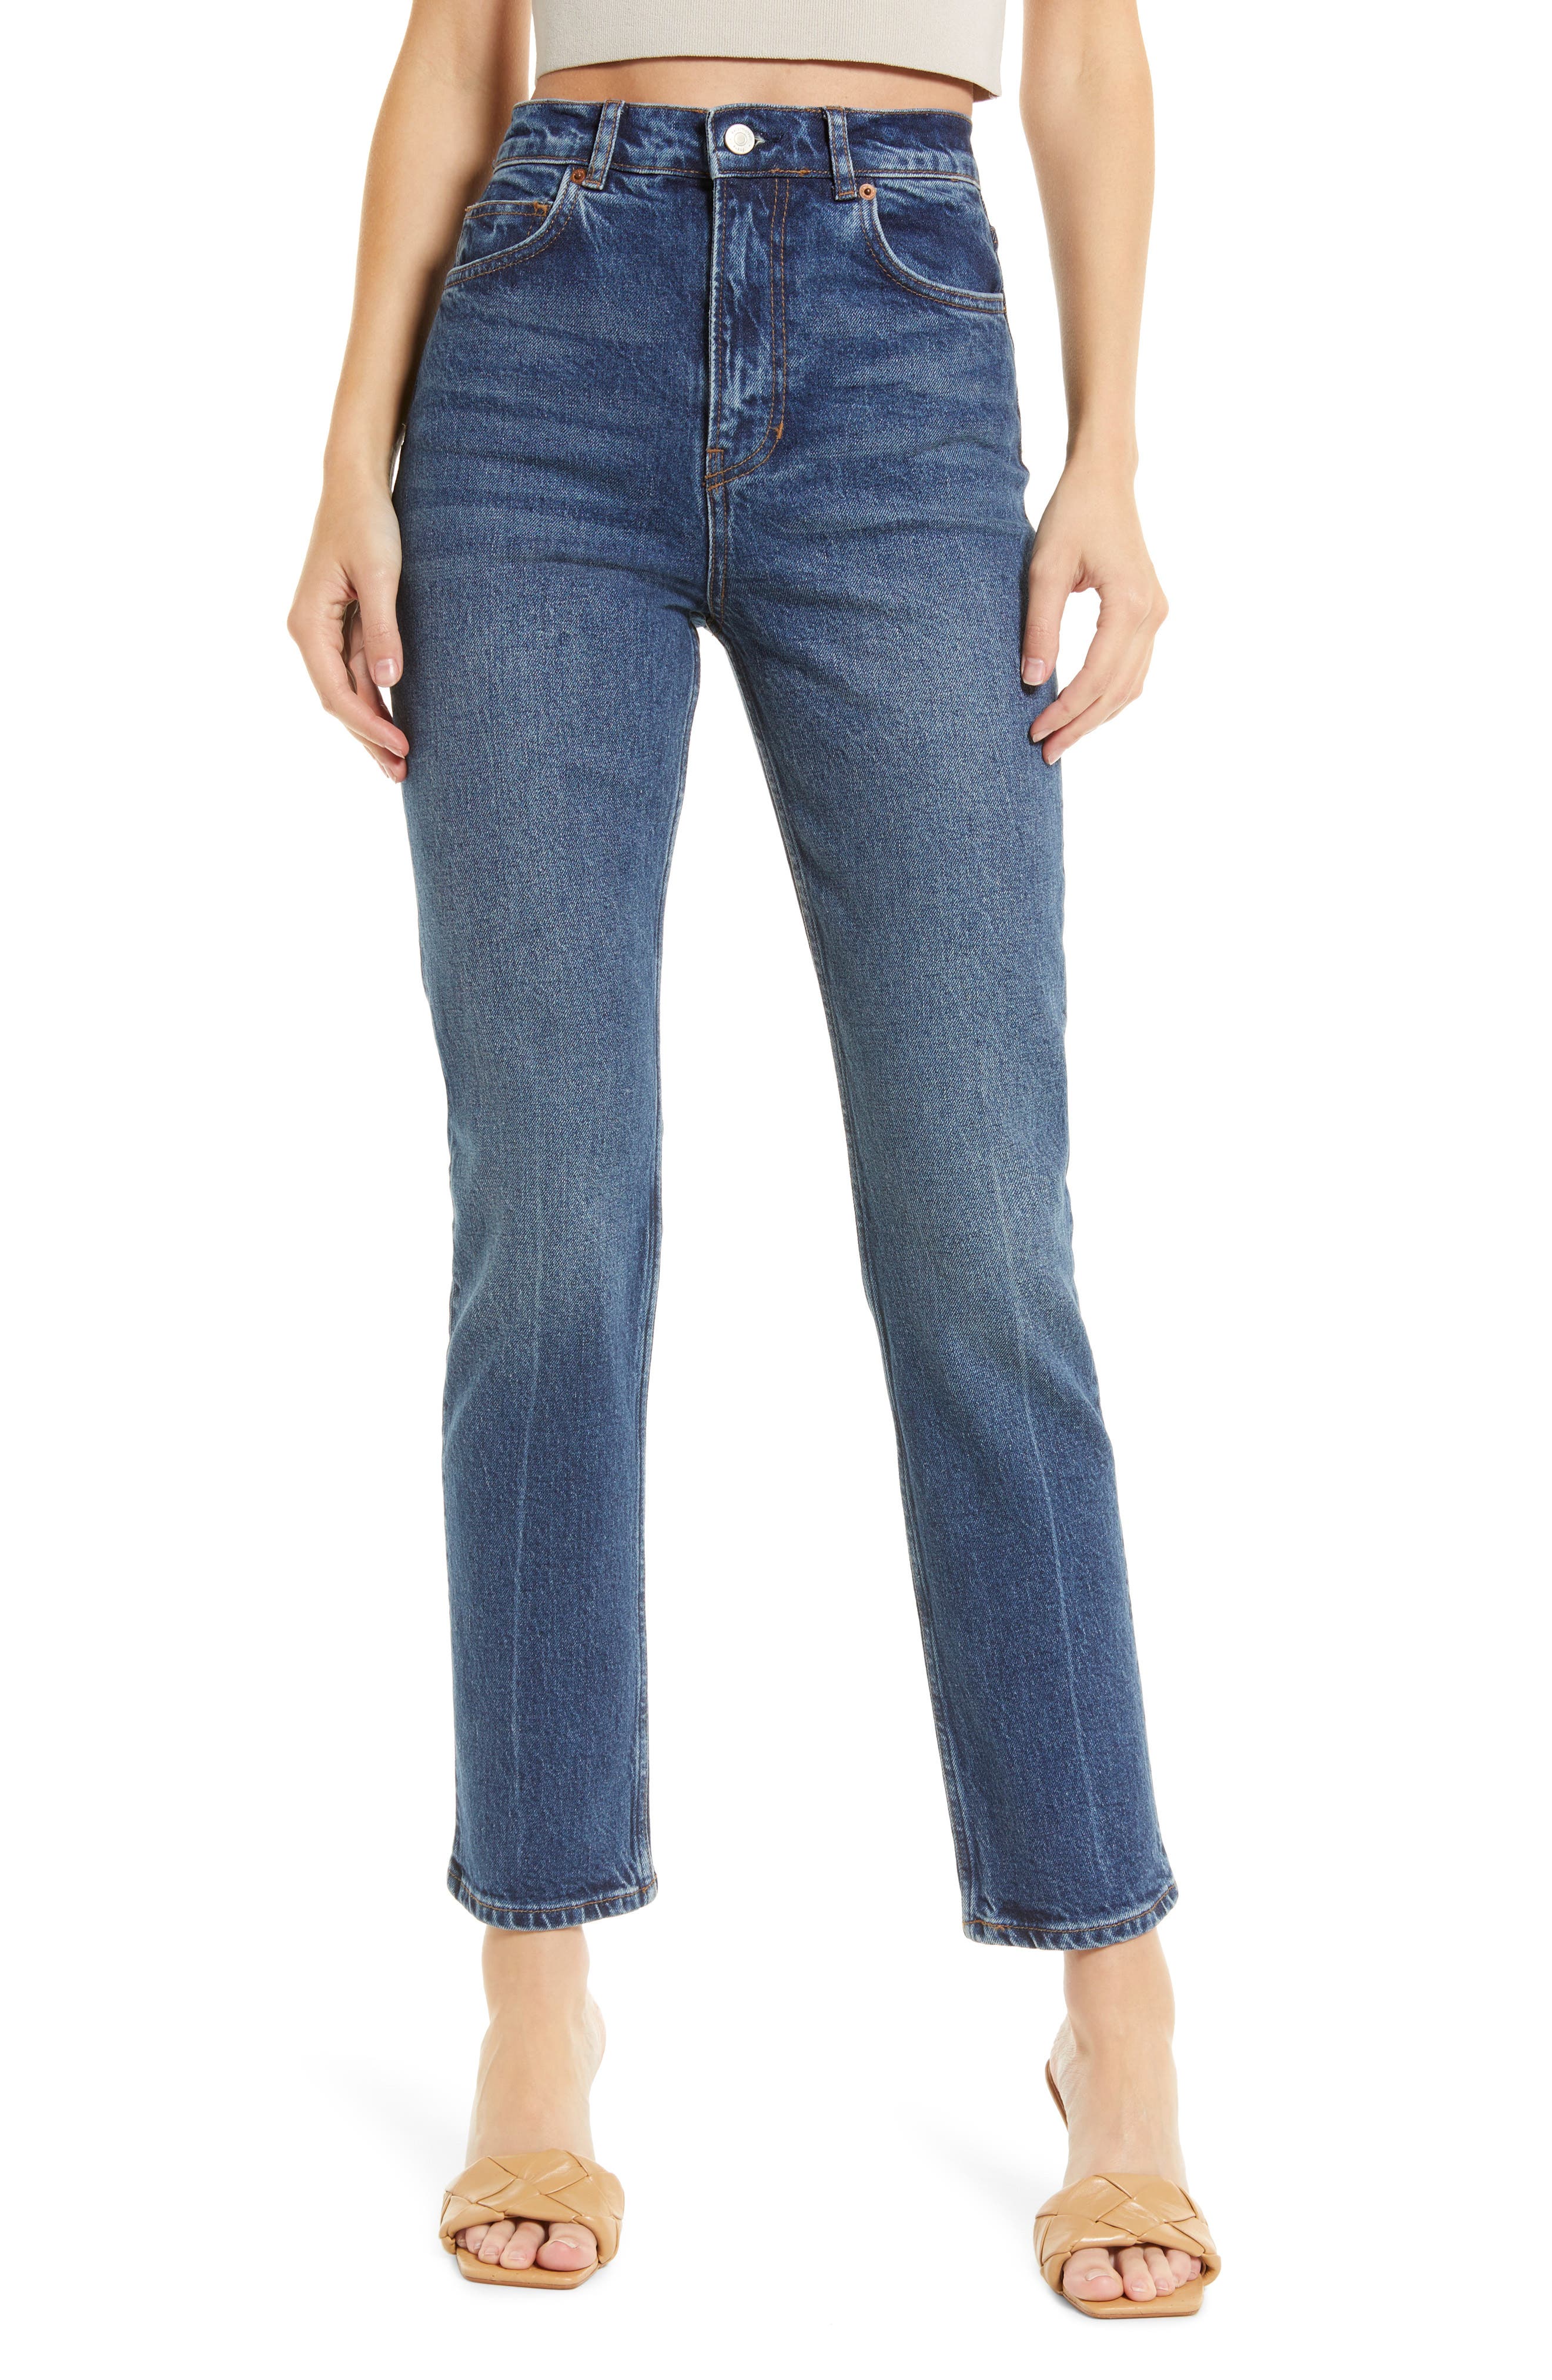 Reformation Liza High Waist Straight Leg Jeans in Icarian at Nordstrom, Size 26